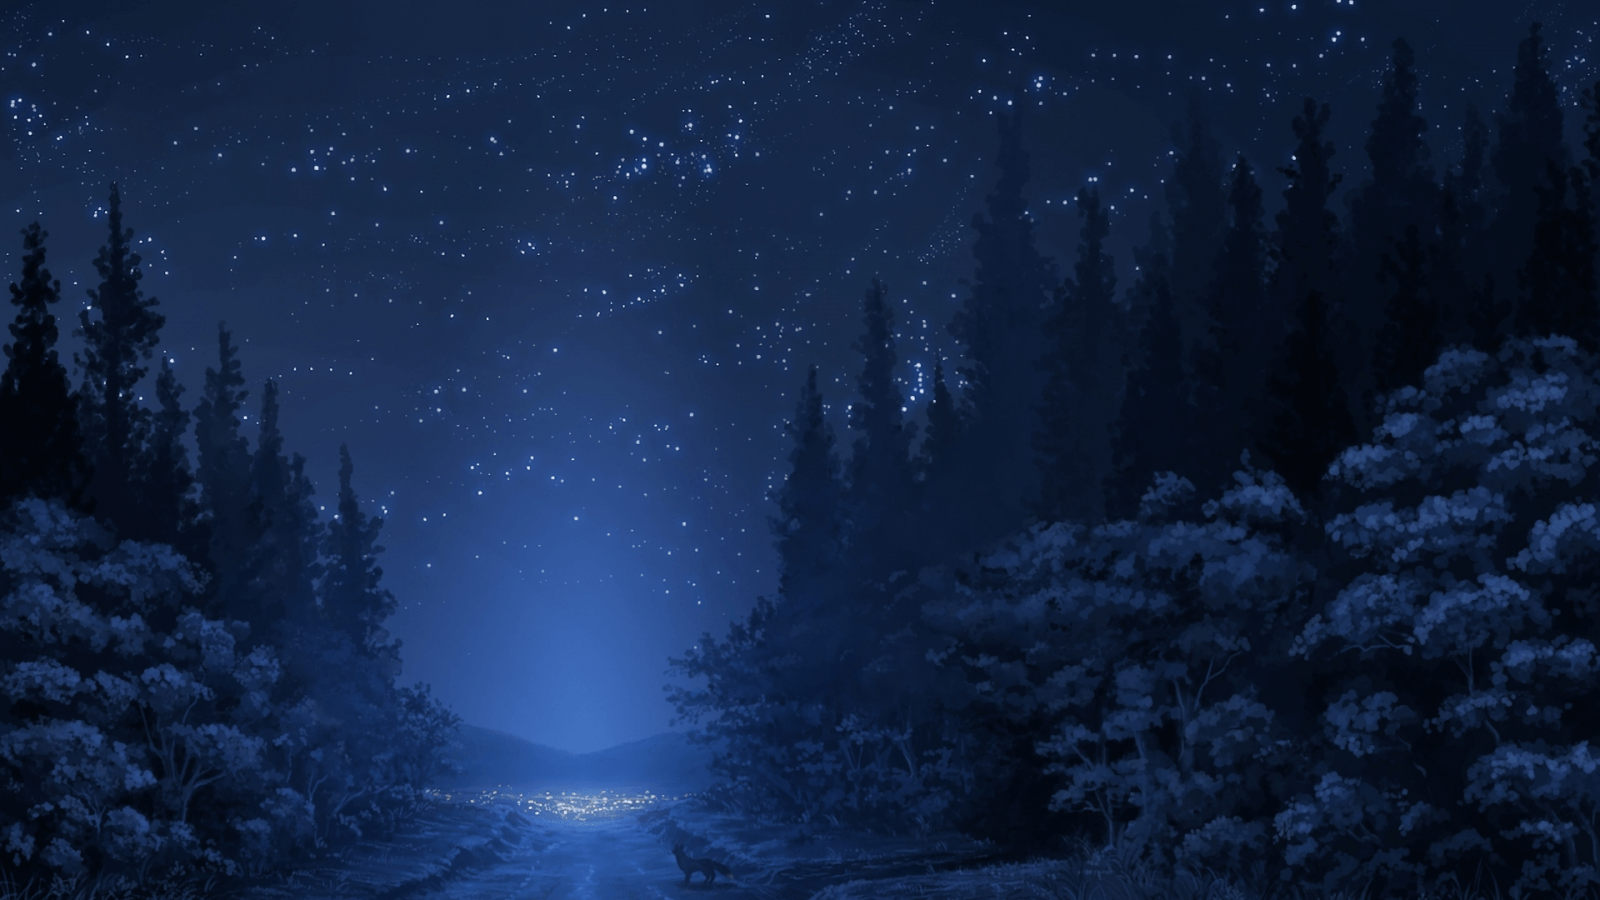 Download 1600x900 Anime Landscape, Forest, Night, Stars, Wolf